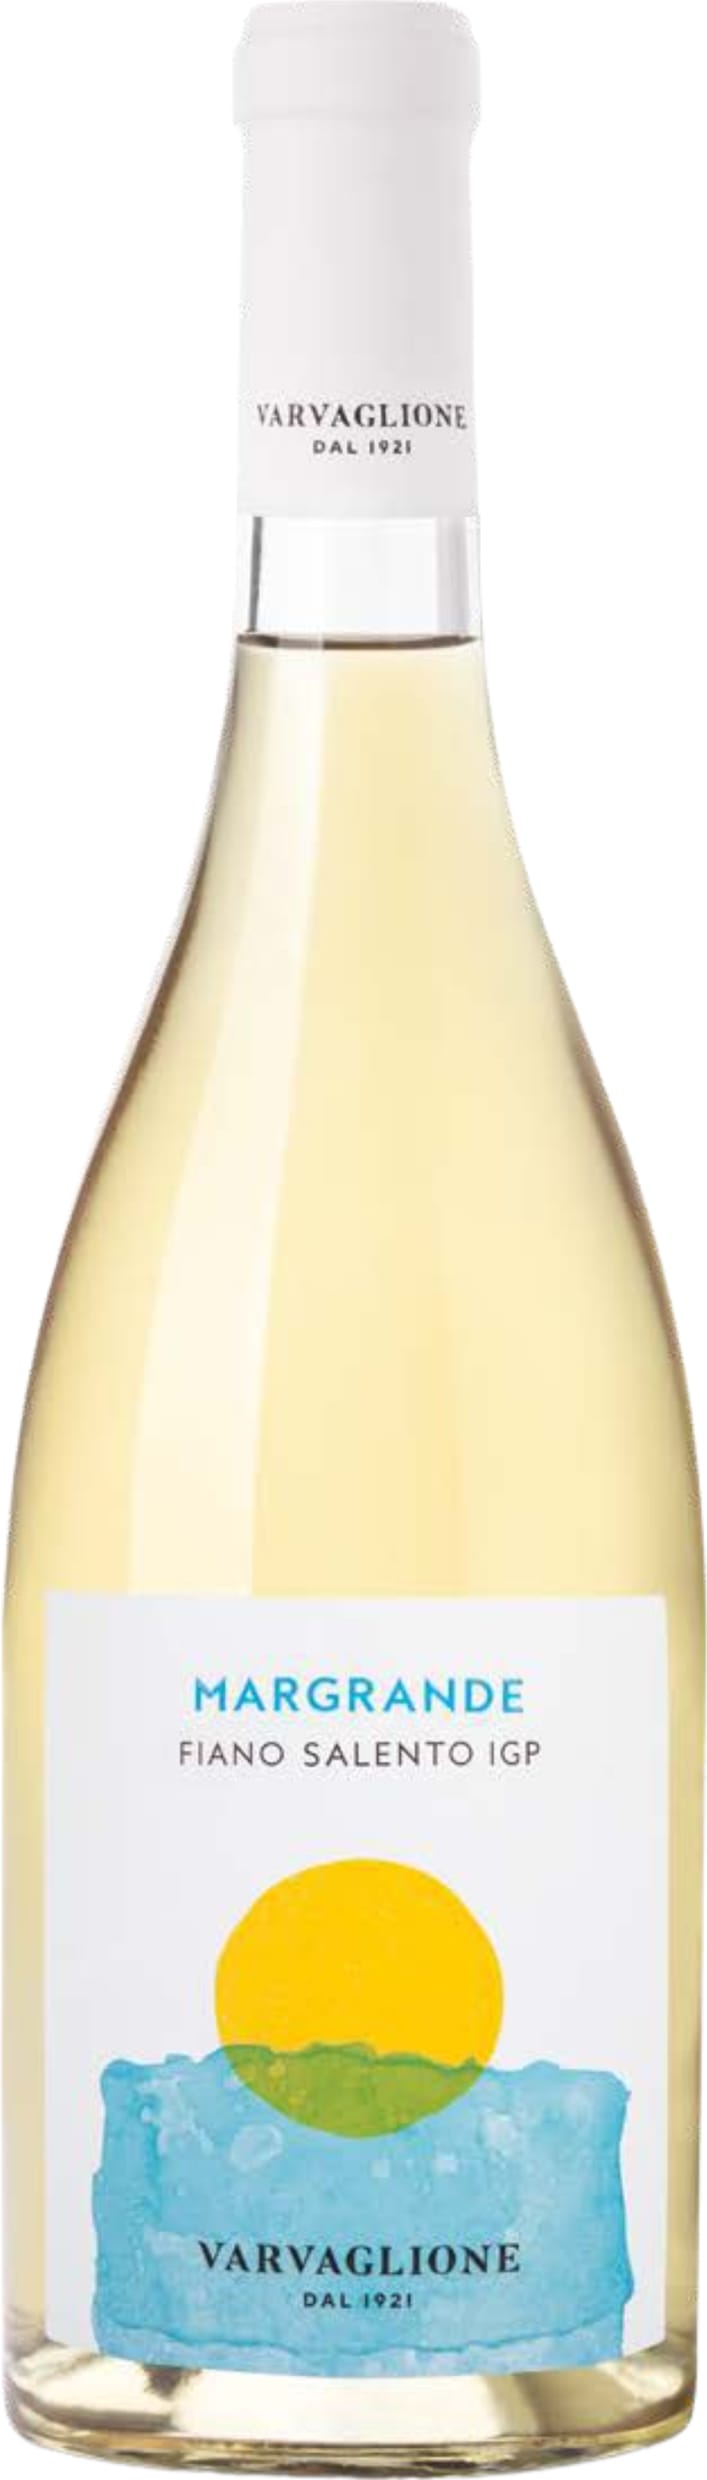 Varvaglione Fiano Margrande 2022 75cl - Buy Varvaglione Wines from GREAT WINES DIRECT wine shop